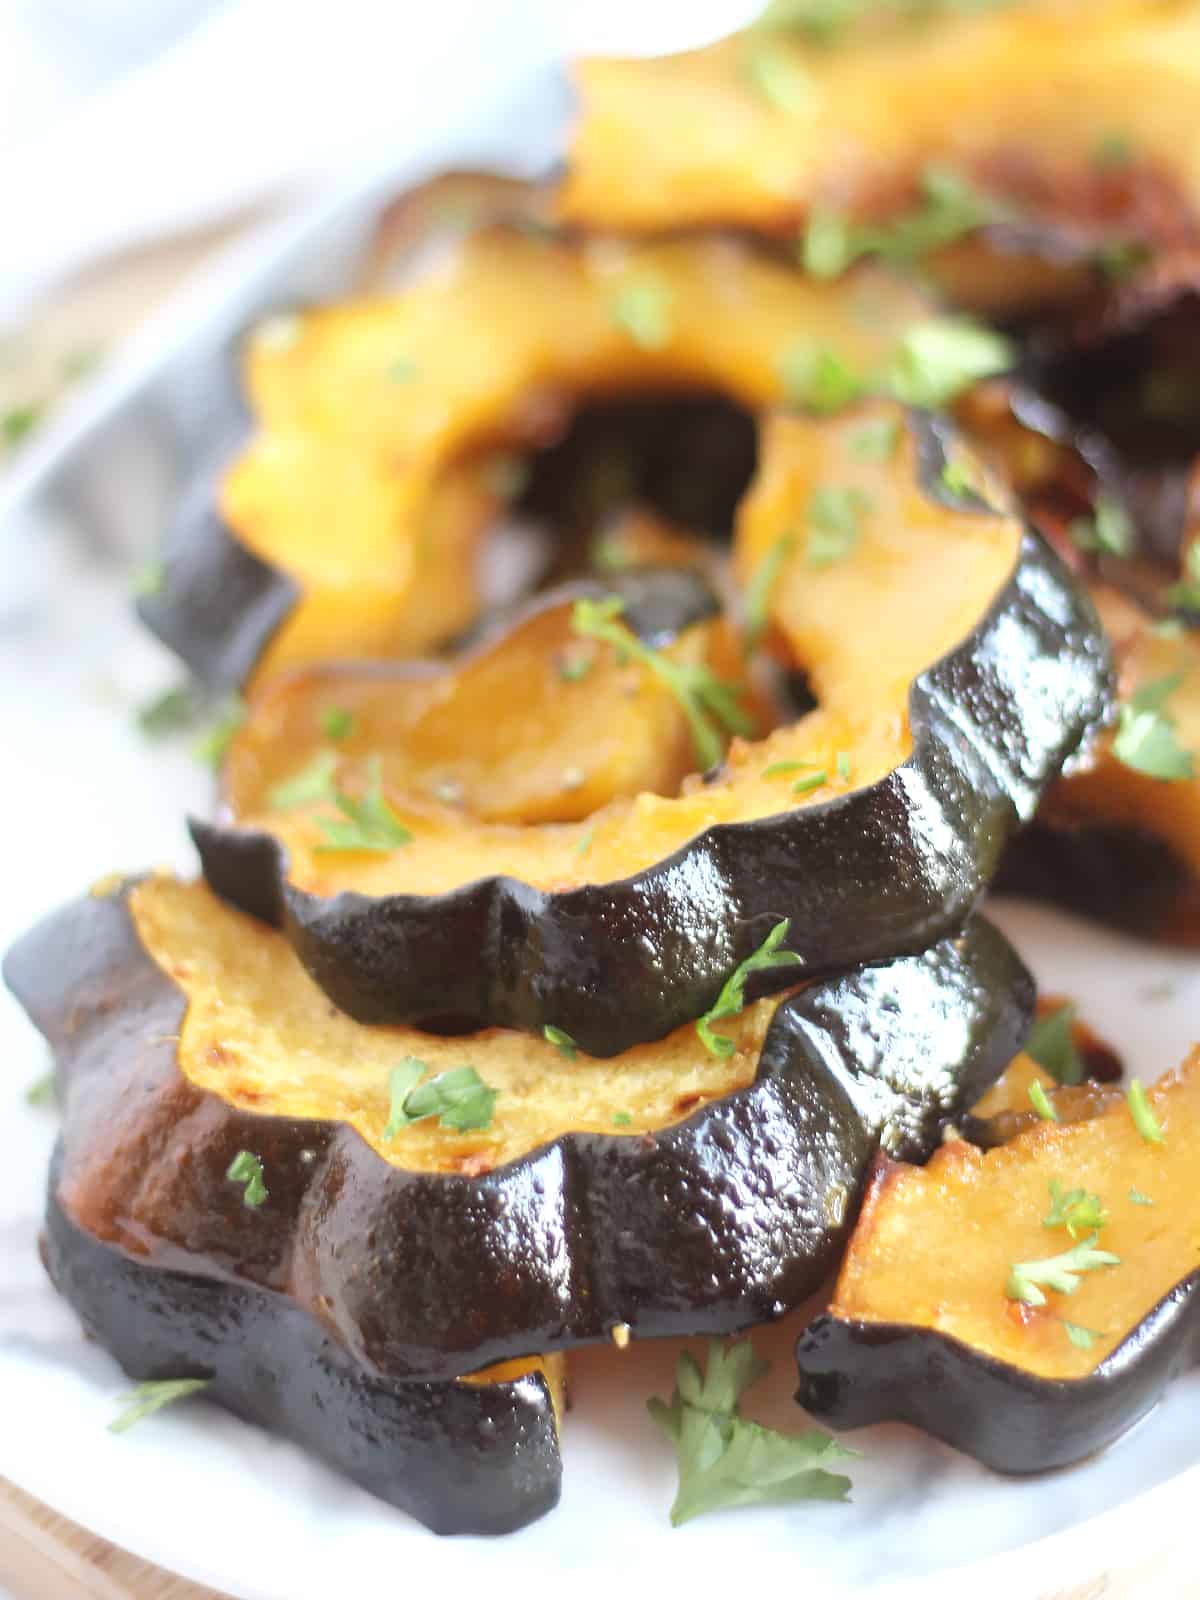 Close up of slices of roasted acorn squash.